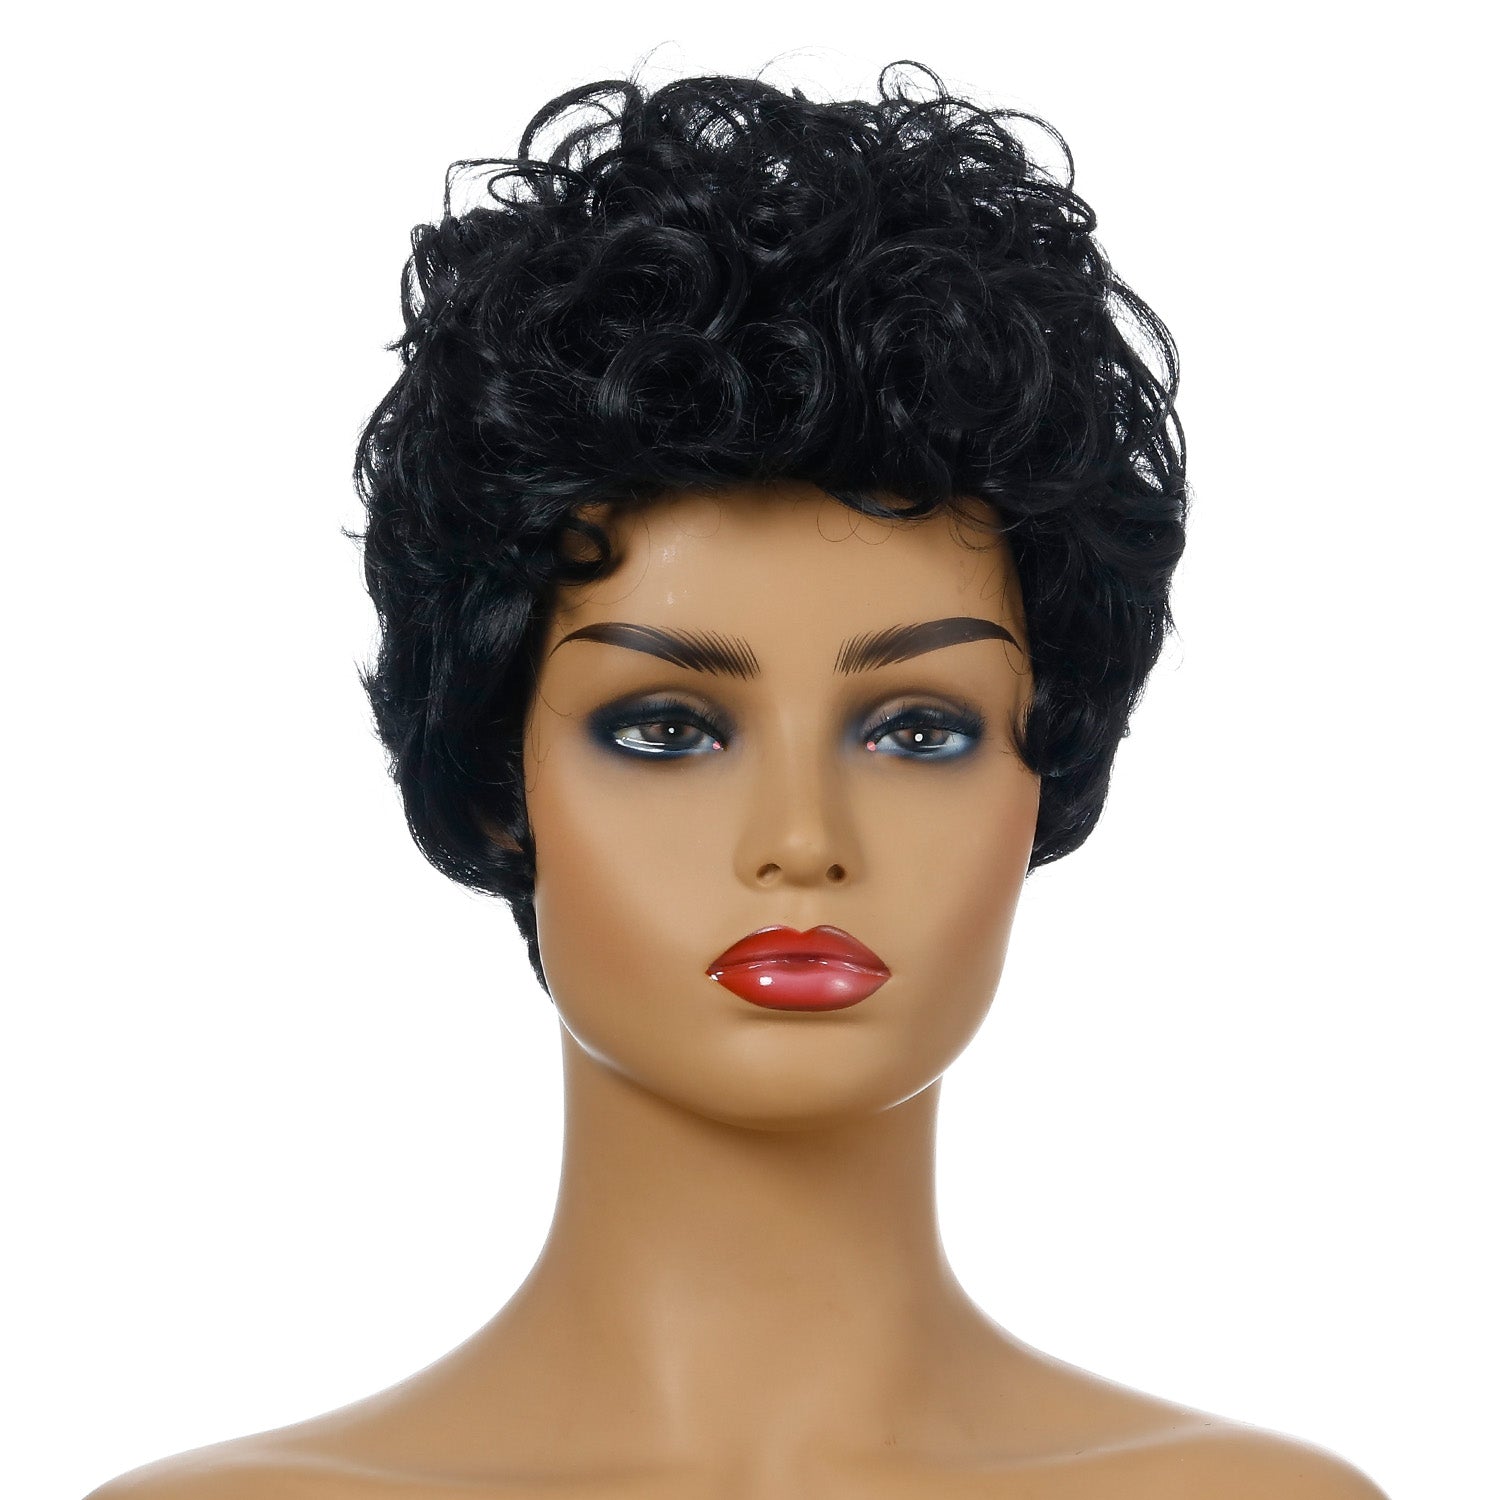 Lady M | Black Short Pixie Cut Curly Wig with Bang